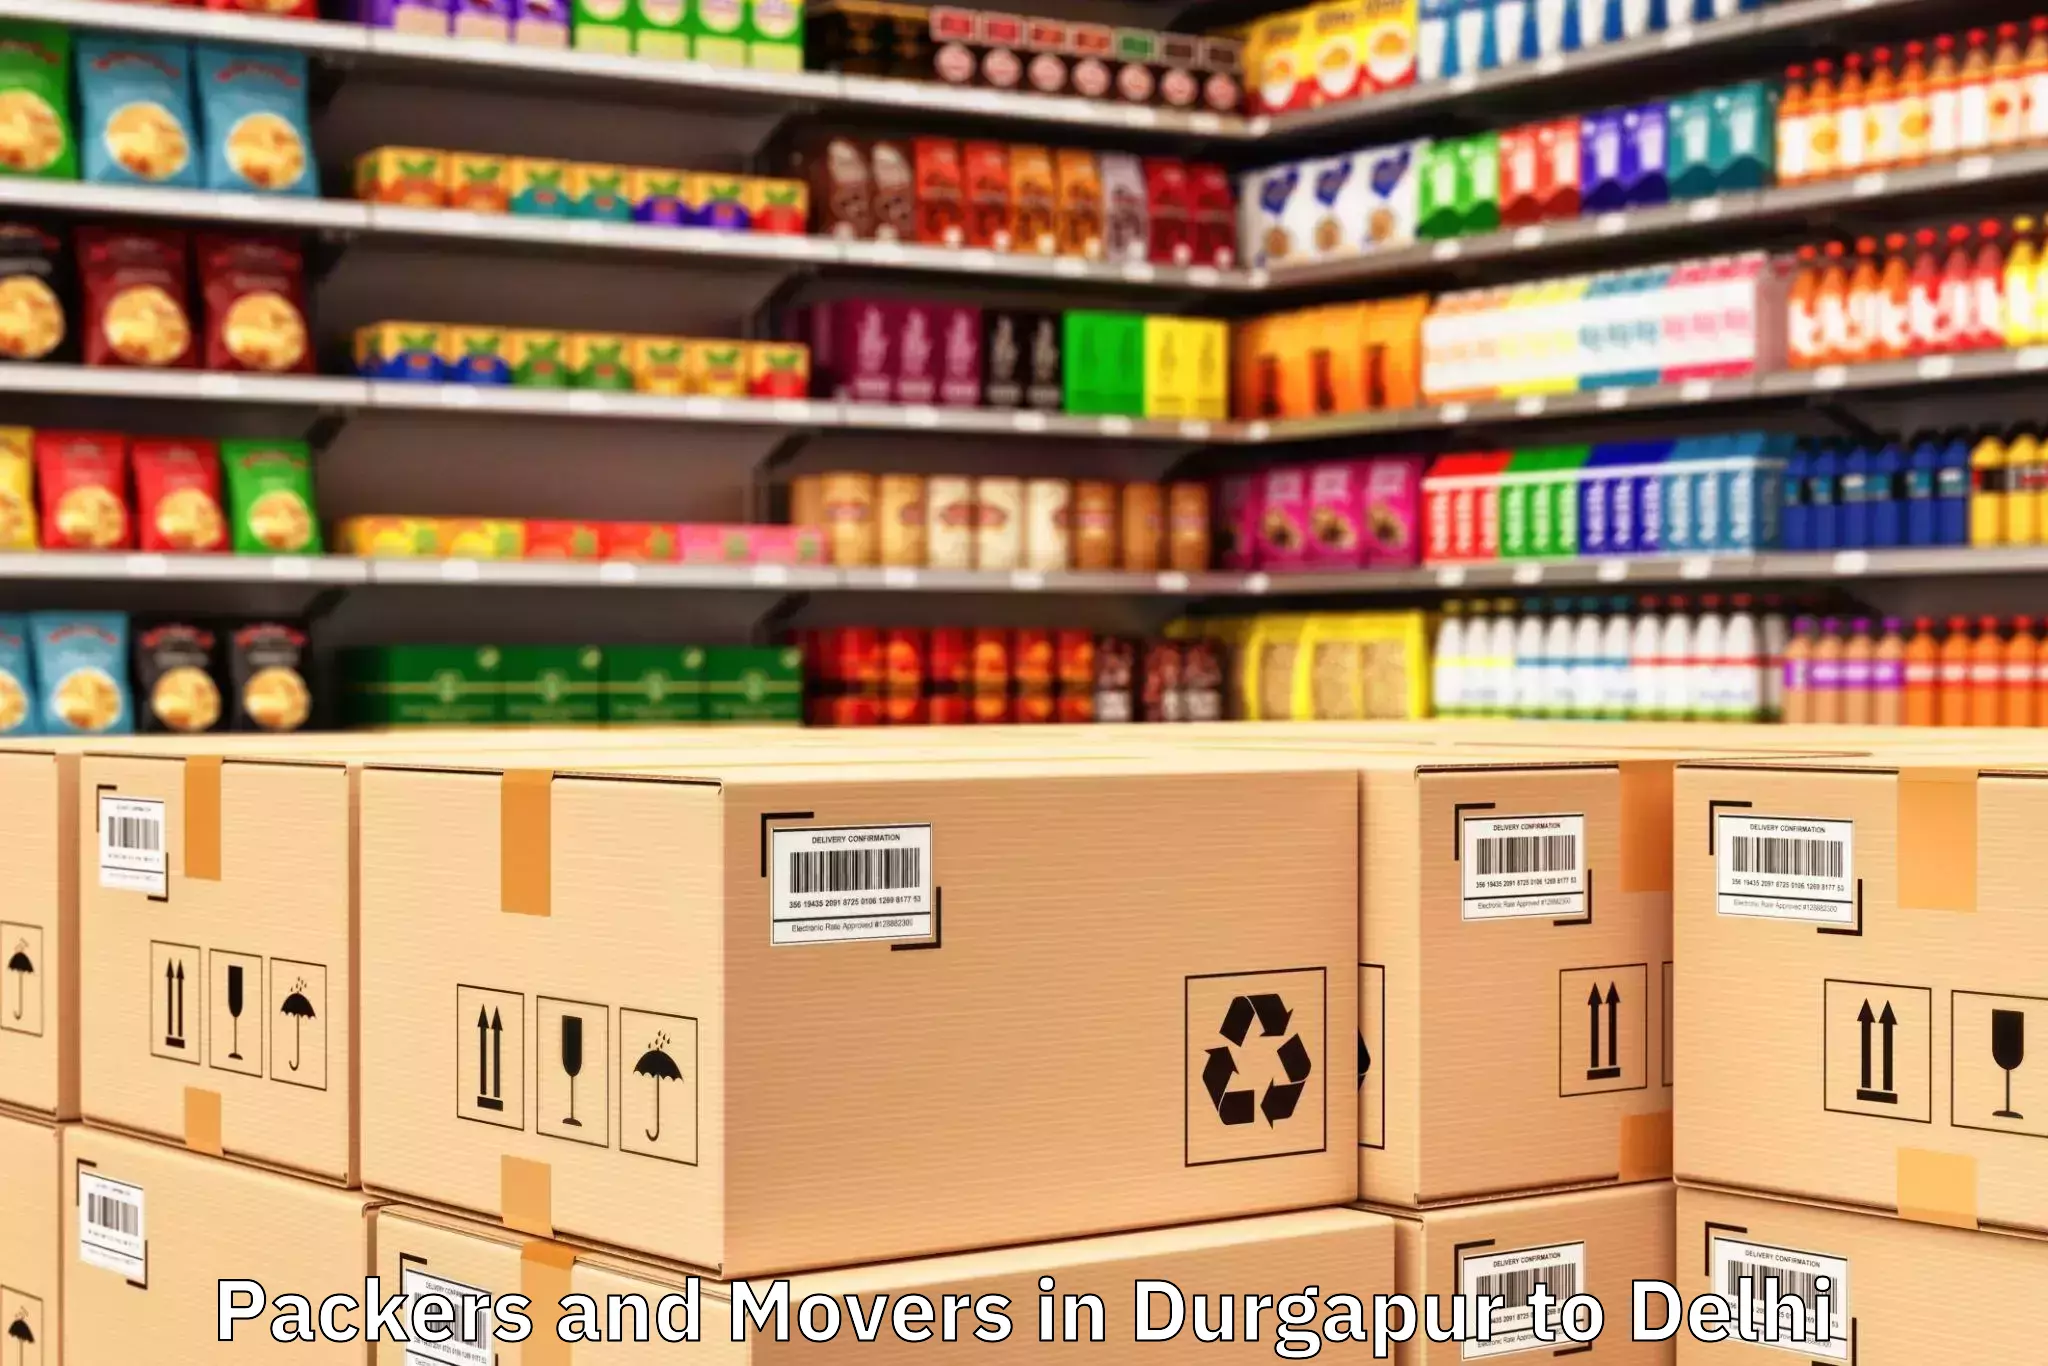 Efficient Durgapur to Delhi Packers And Movers